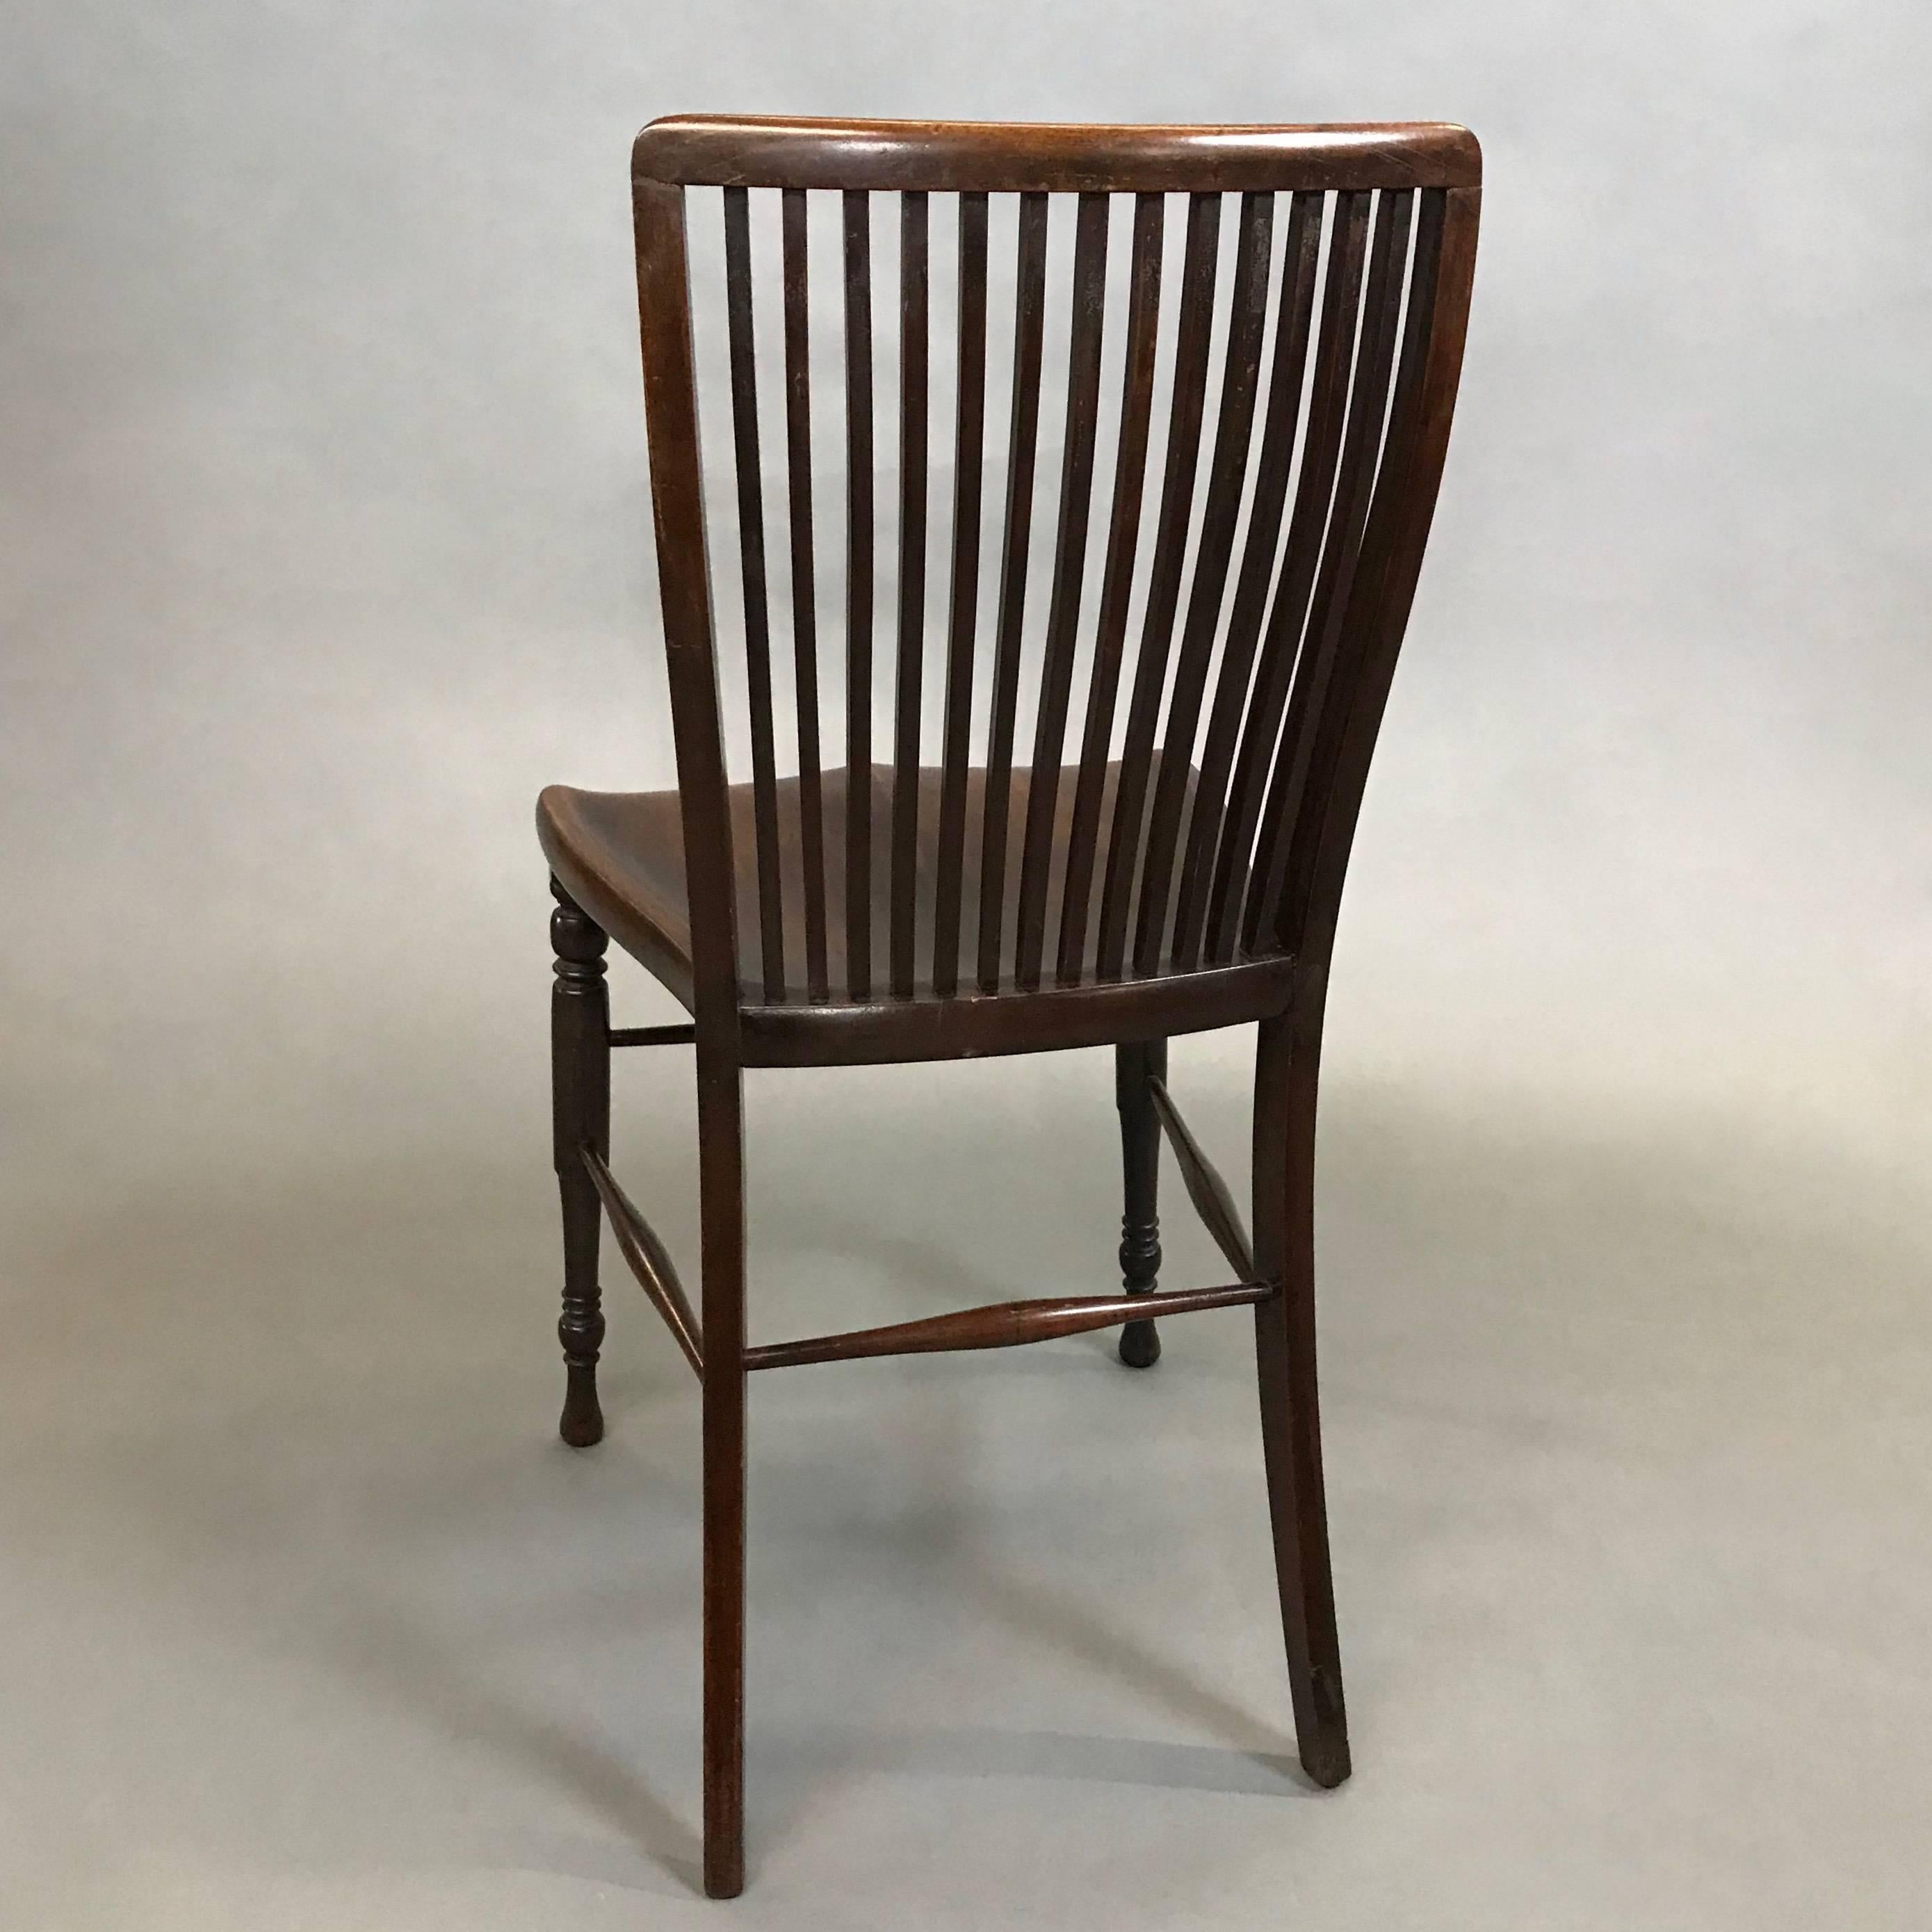 Antique, mahogany, accent, side chair circa 1860s features a curved, spindle back with turned front legs.